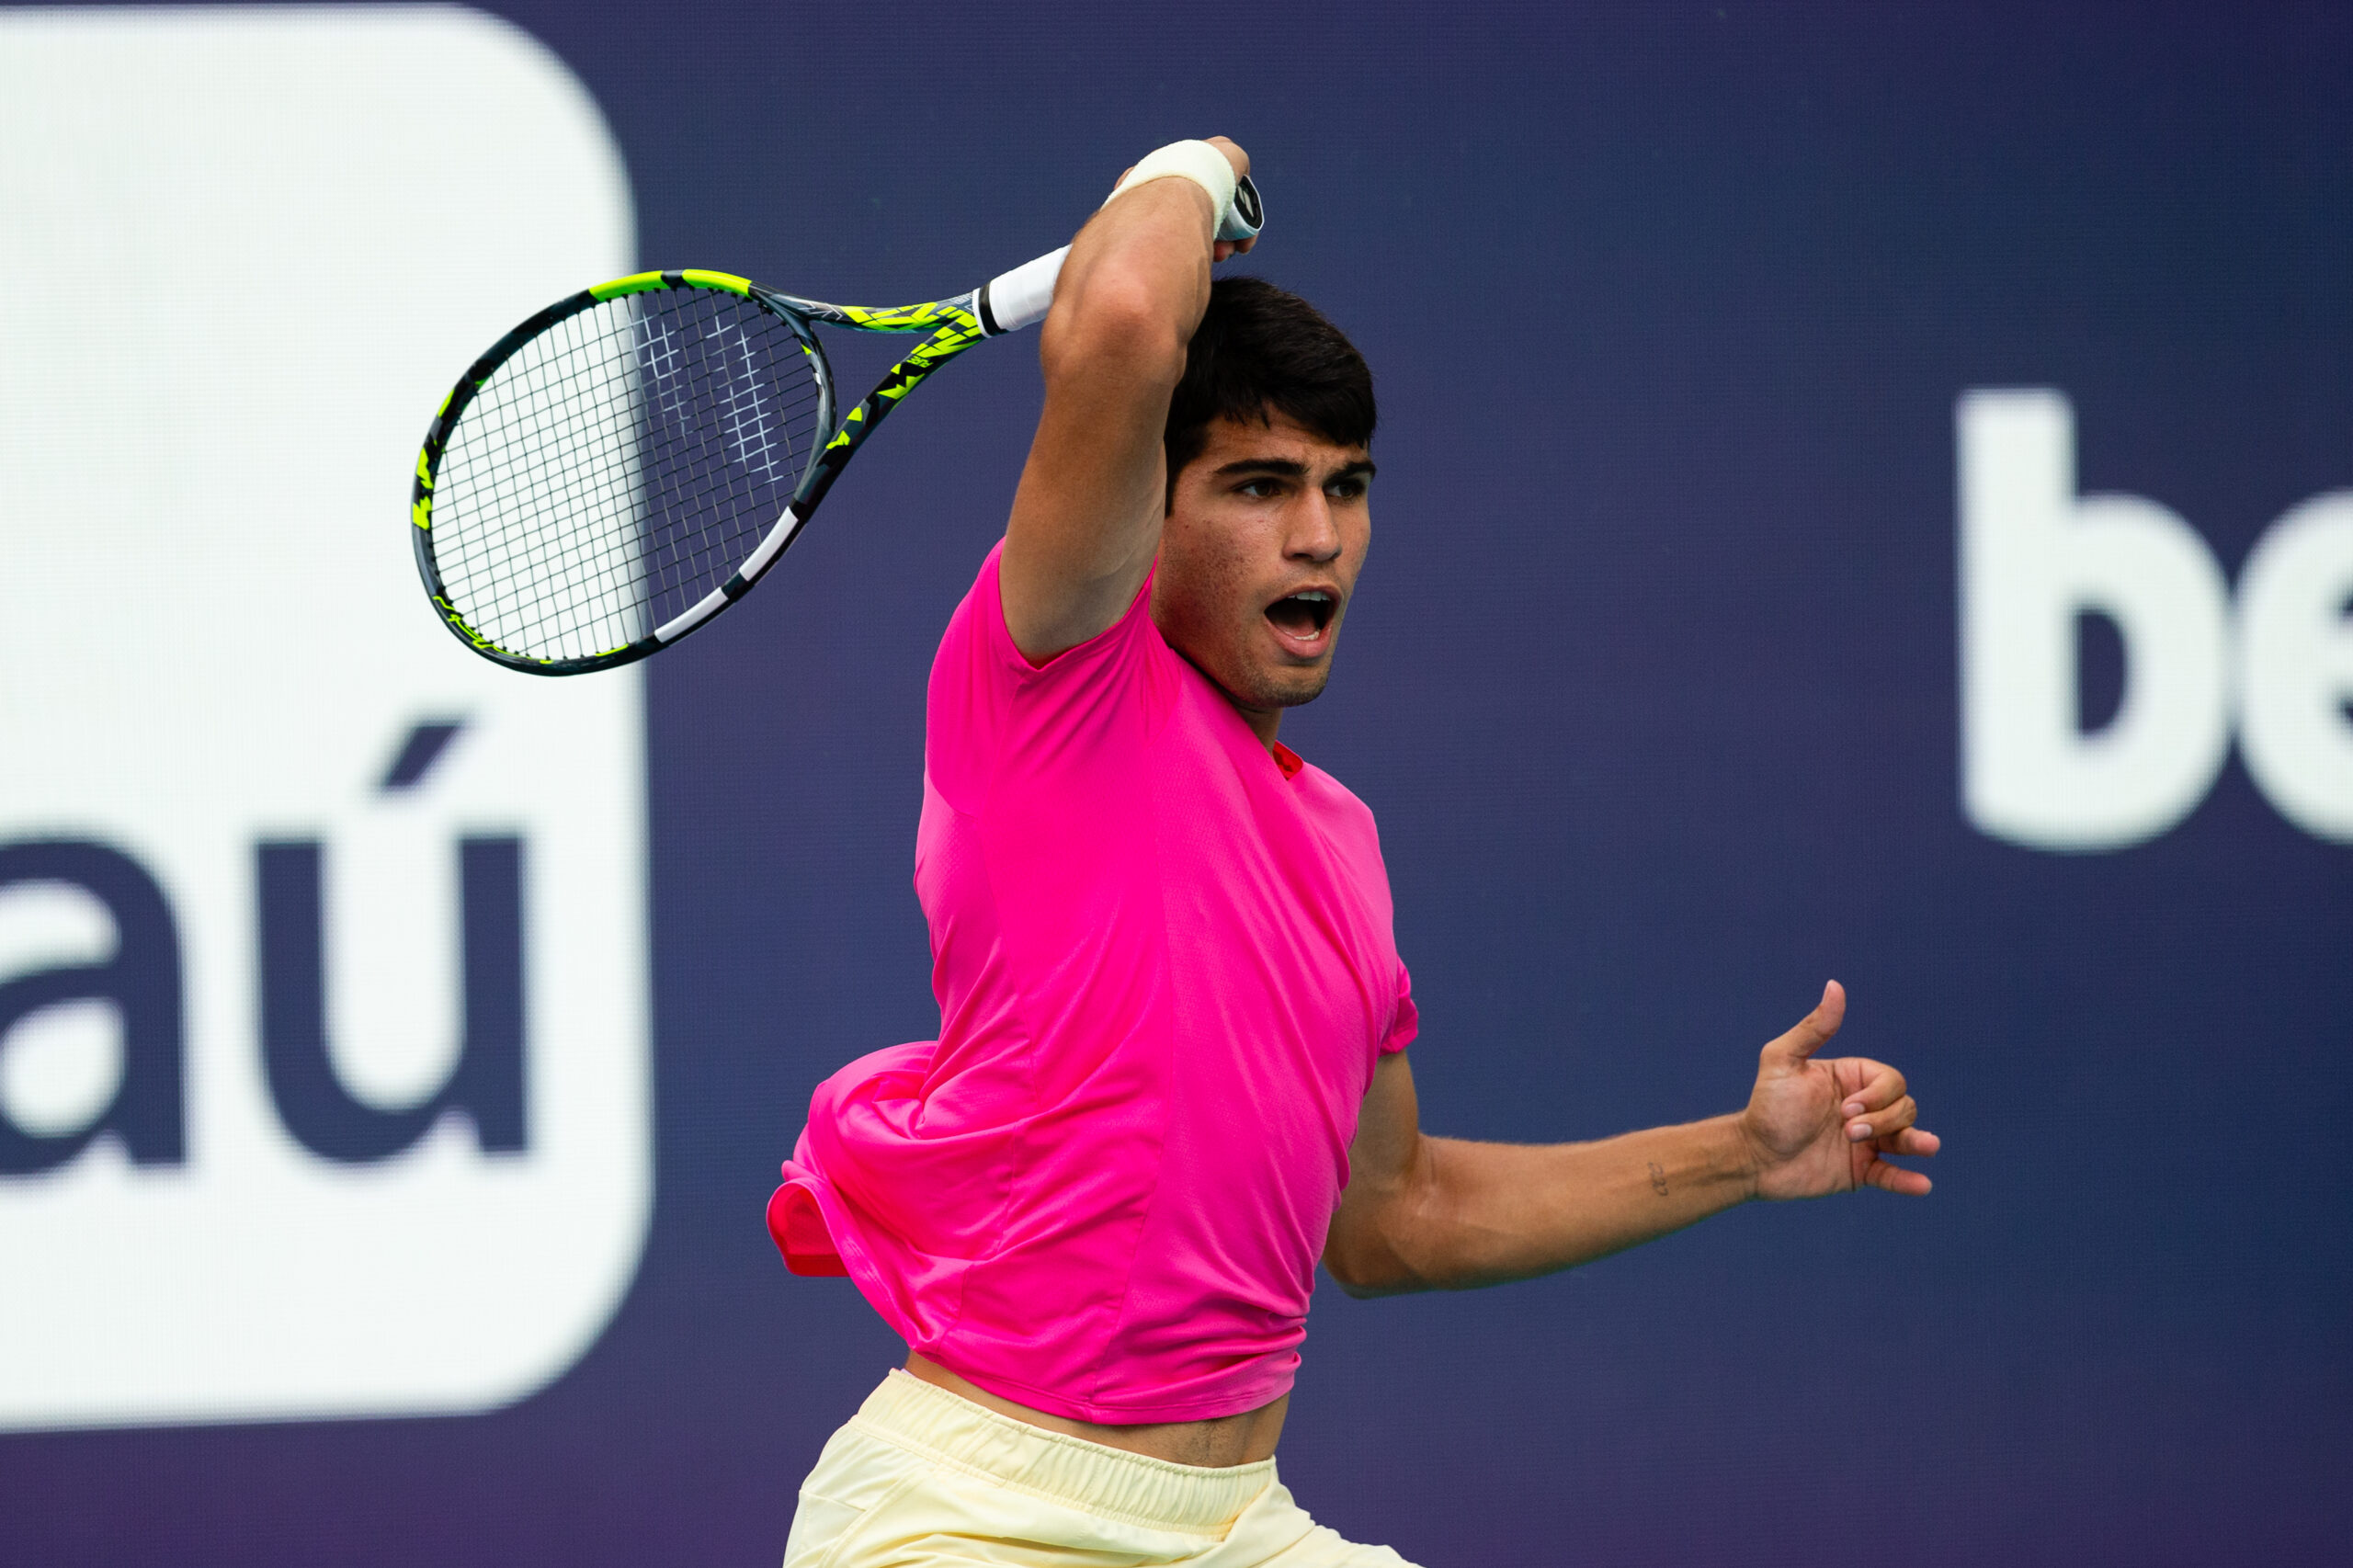 Carlos Alcaraz during his match against Dusan Lajovic on March 26 at the 2023 Miami Open in Miami Gardens, Florida.